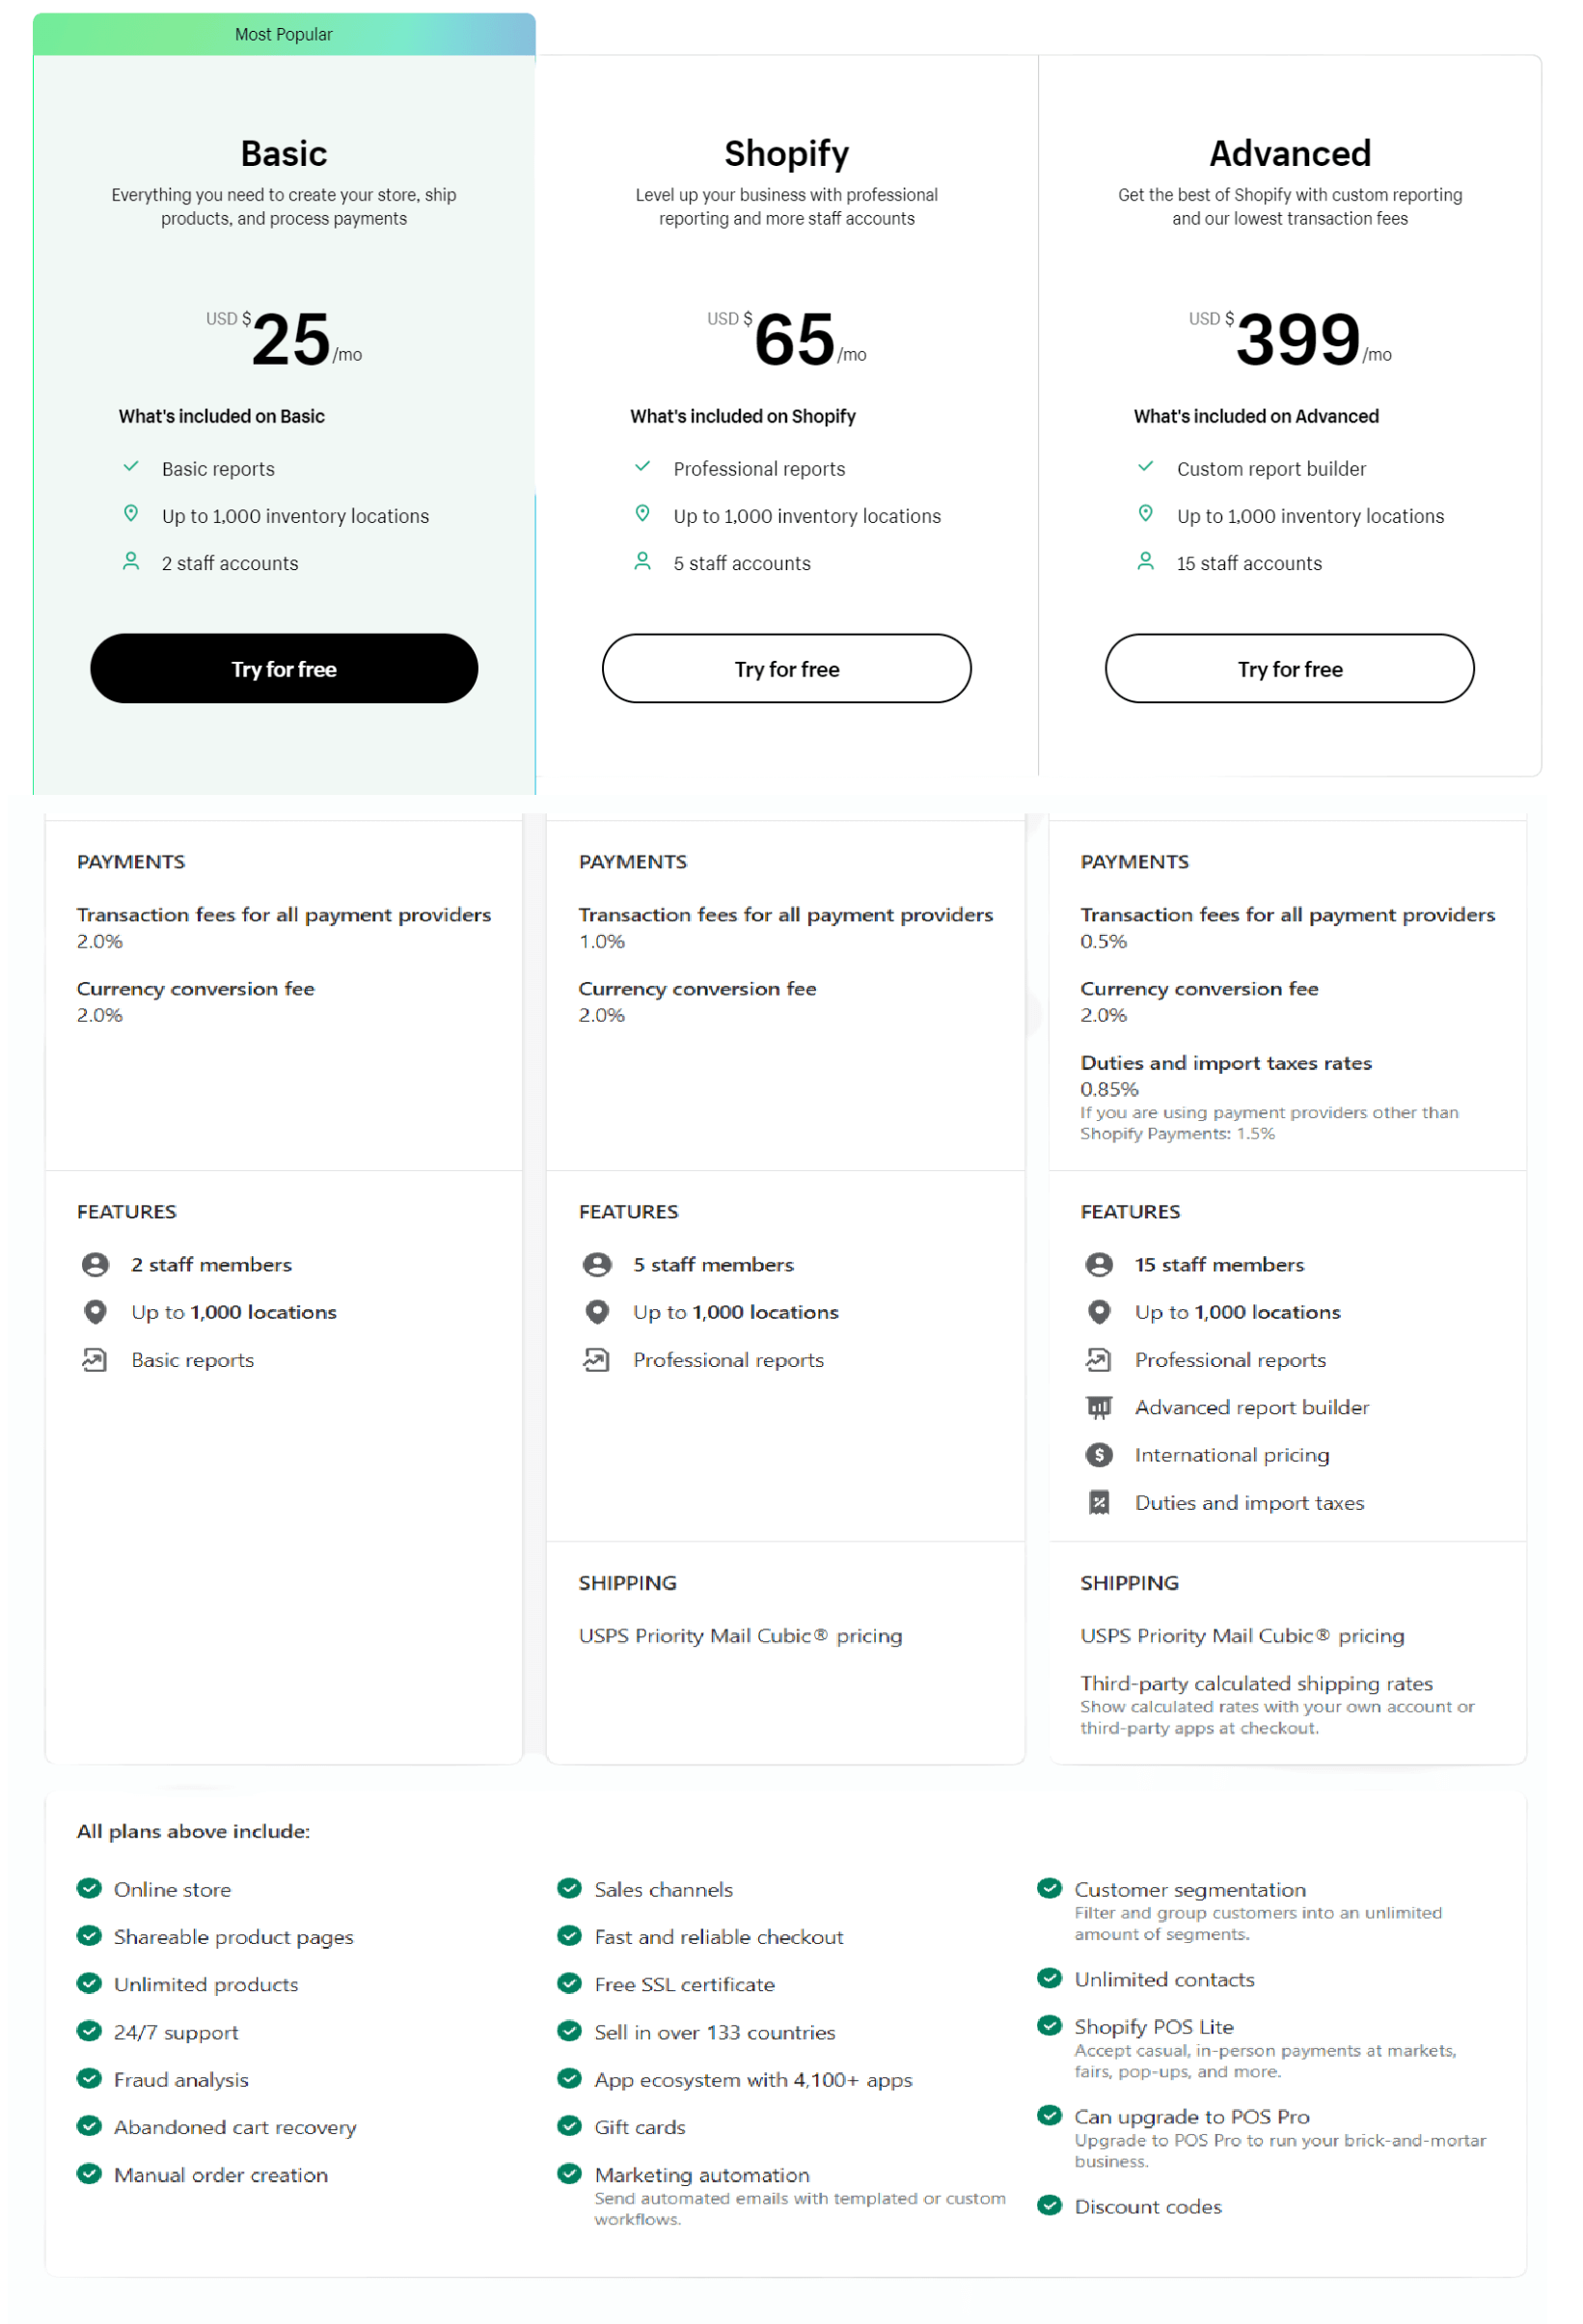 shopify pricing philippines